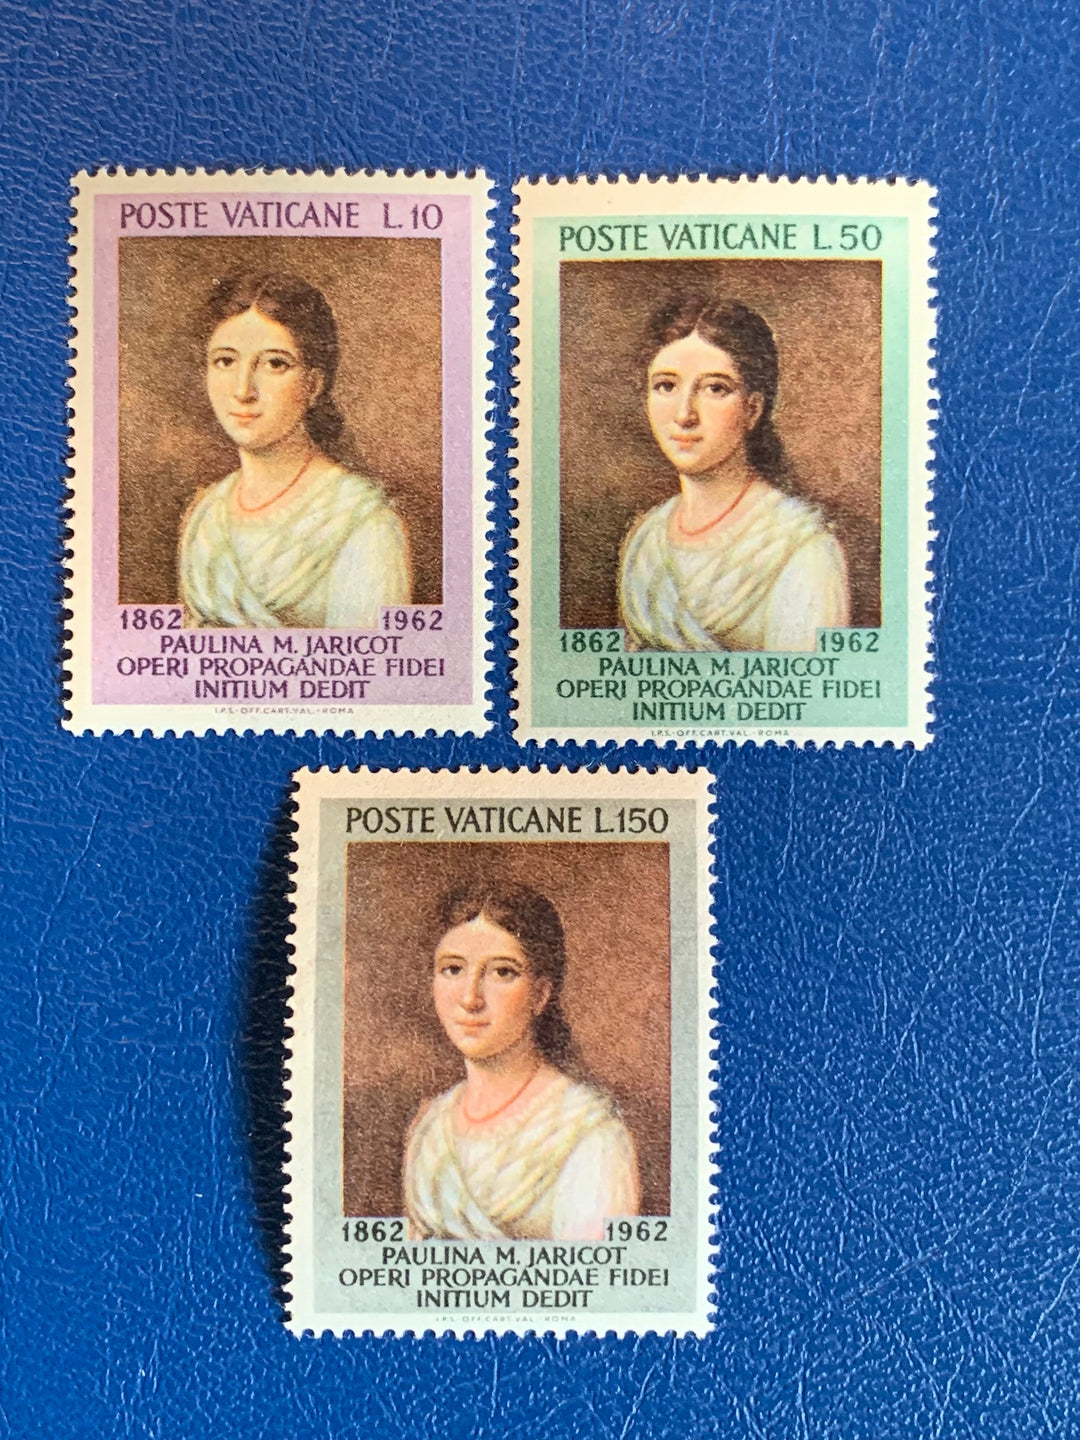 Vatican - Original Vintage Postage Stamps- 1963 - Pauline Marie Jaricots - for the collector, artist or crafter